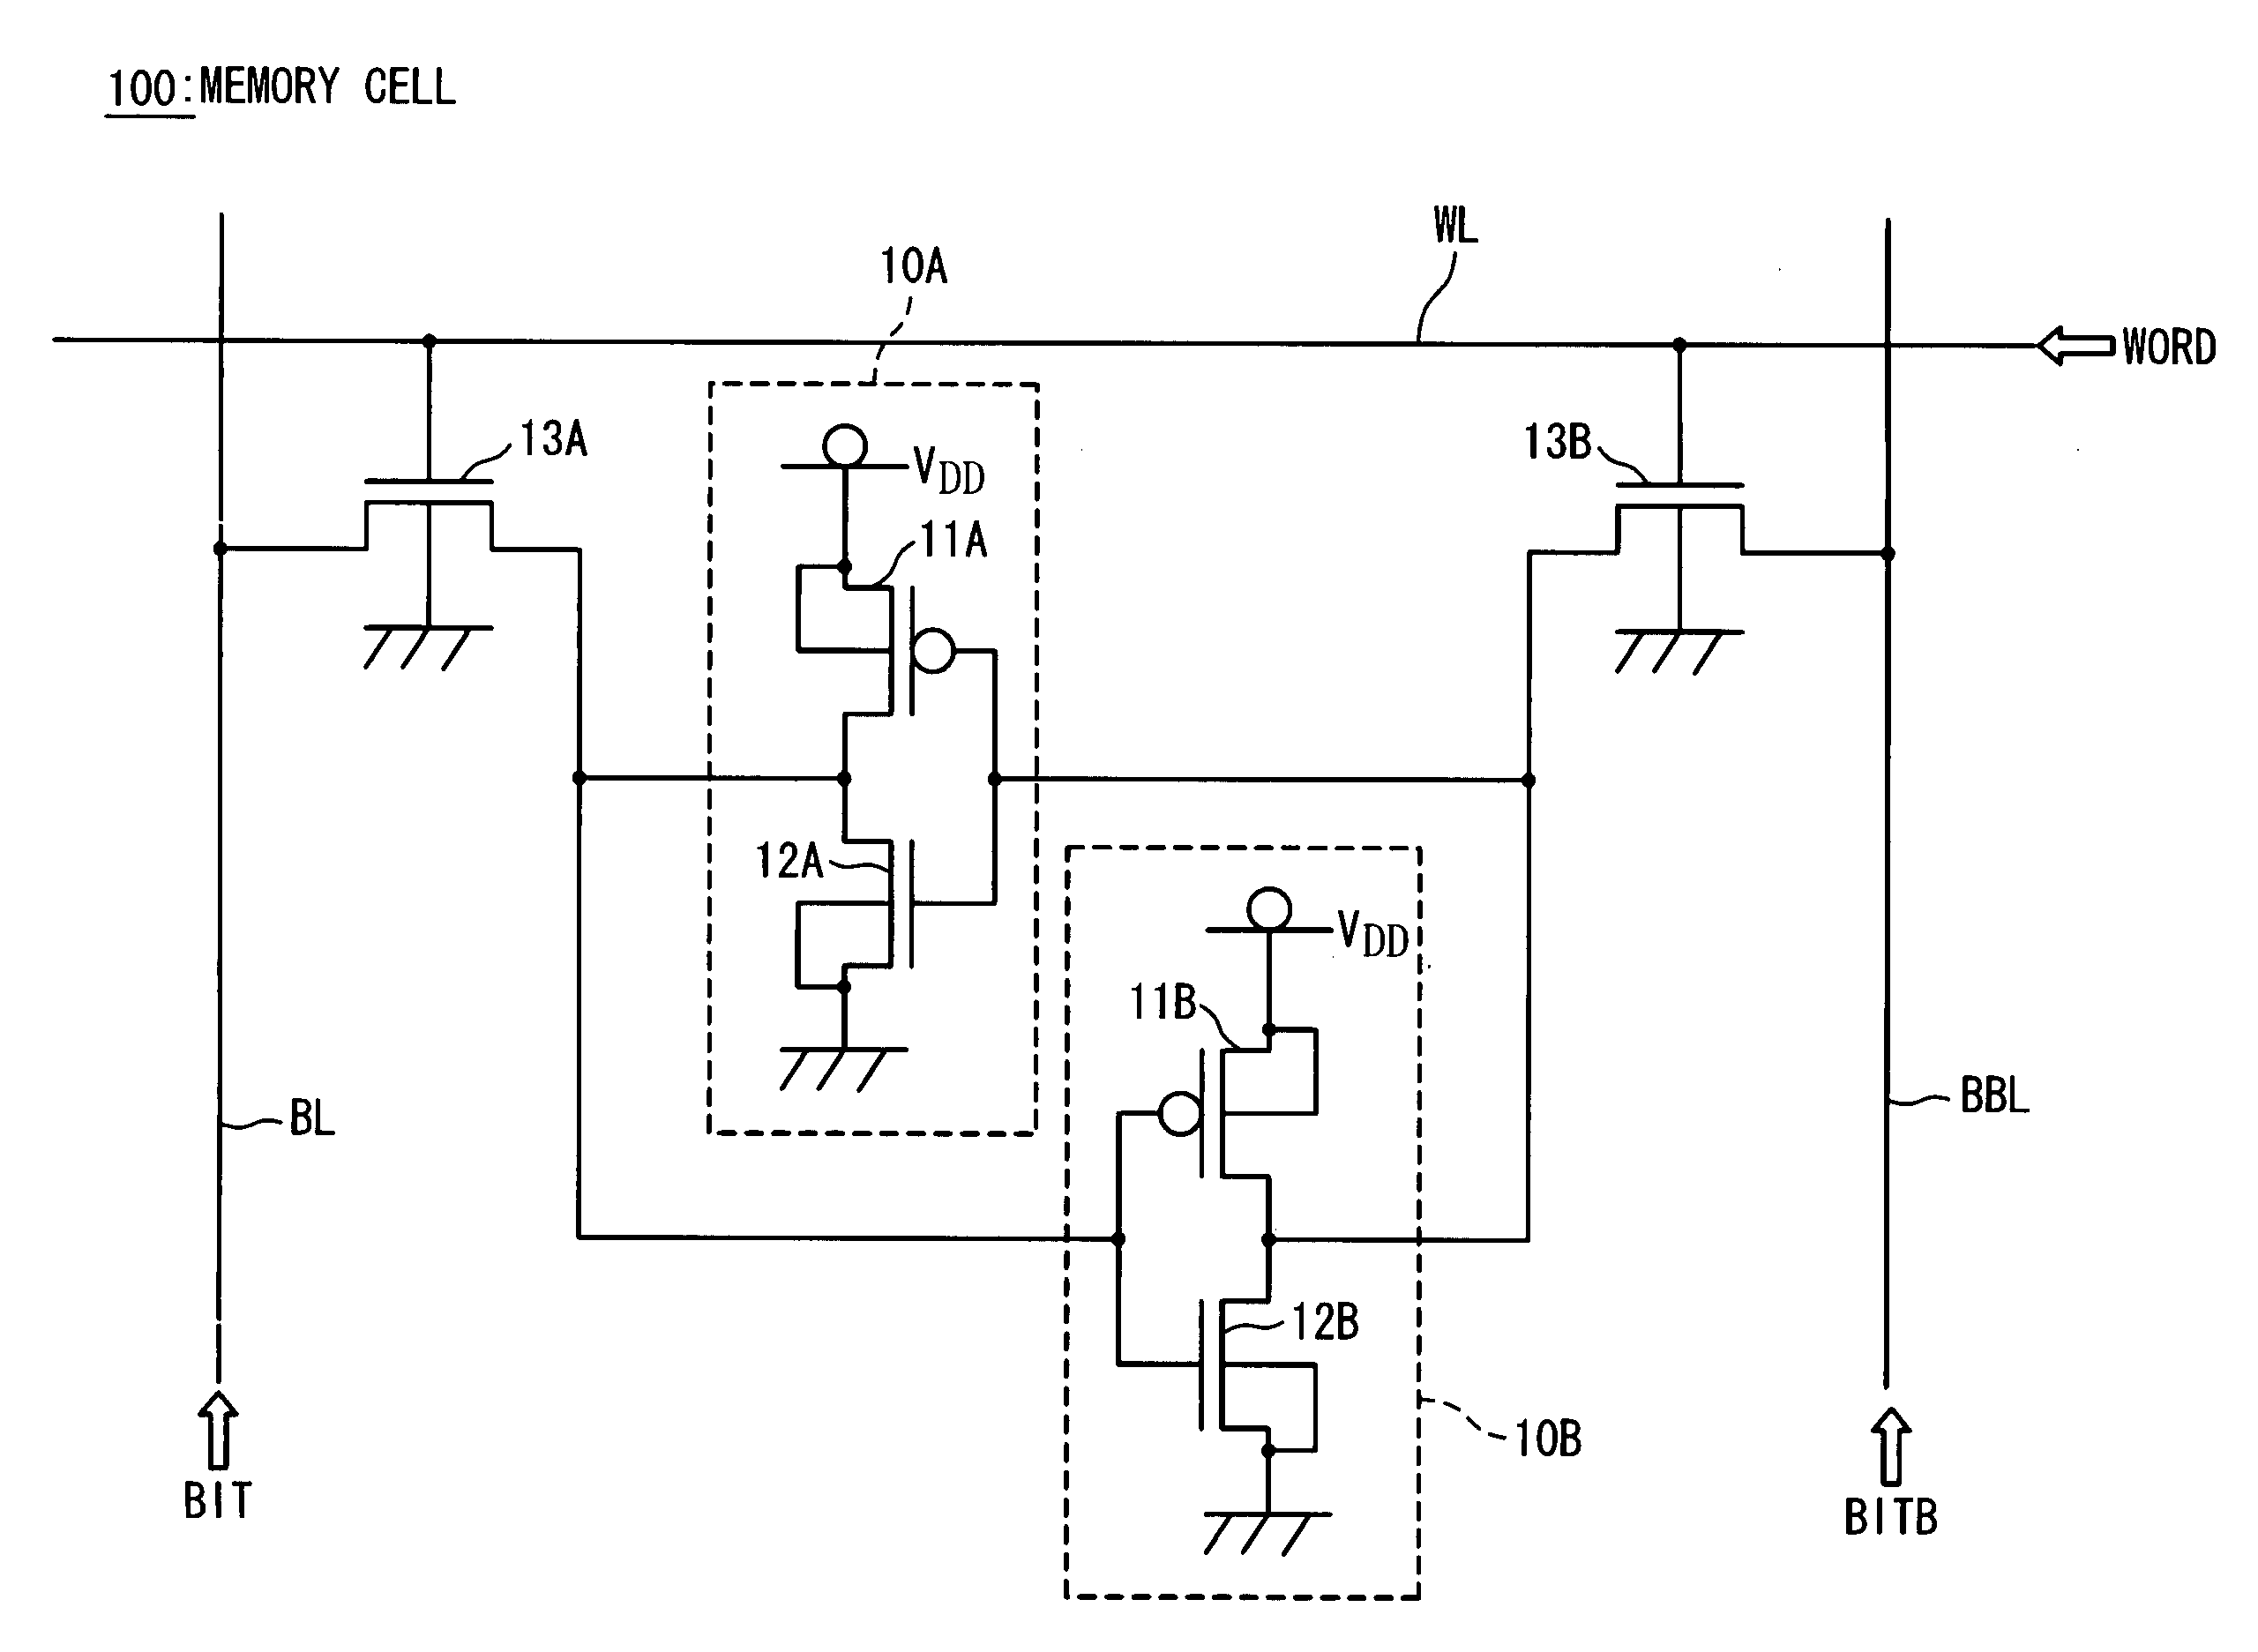 Static semiconductor memory device